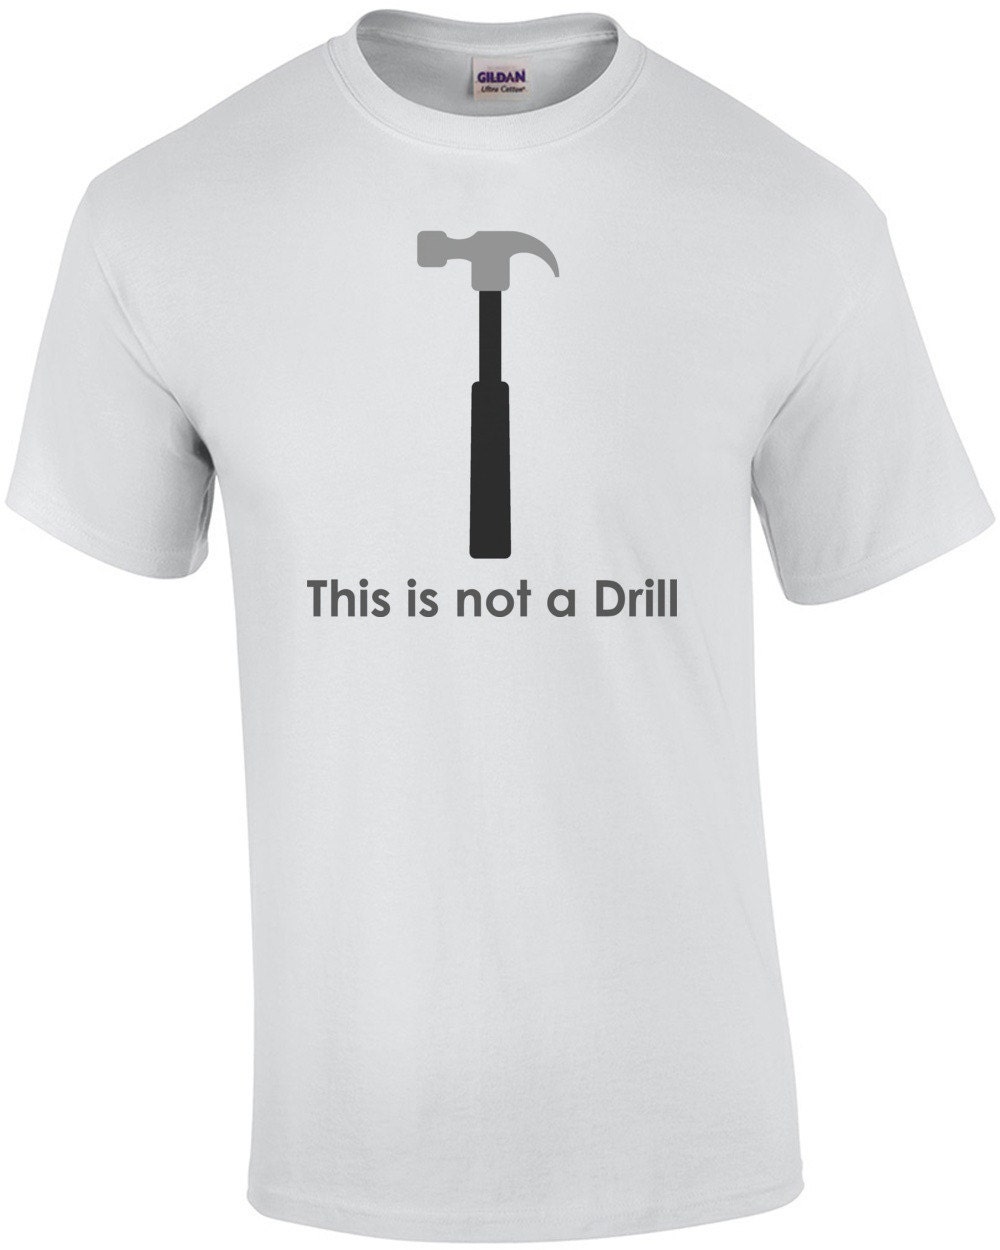 This is not a drill Funny T-Shirt